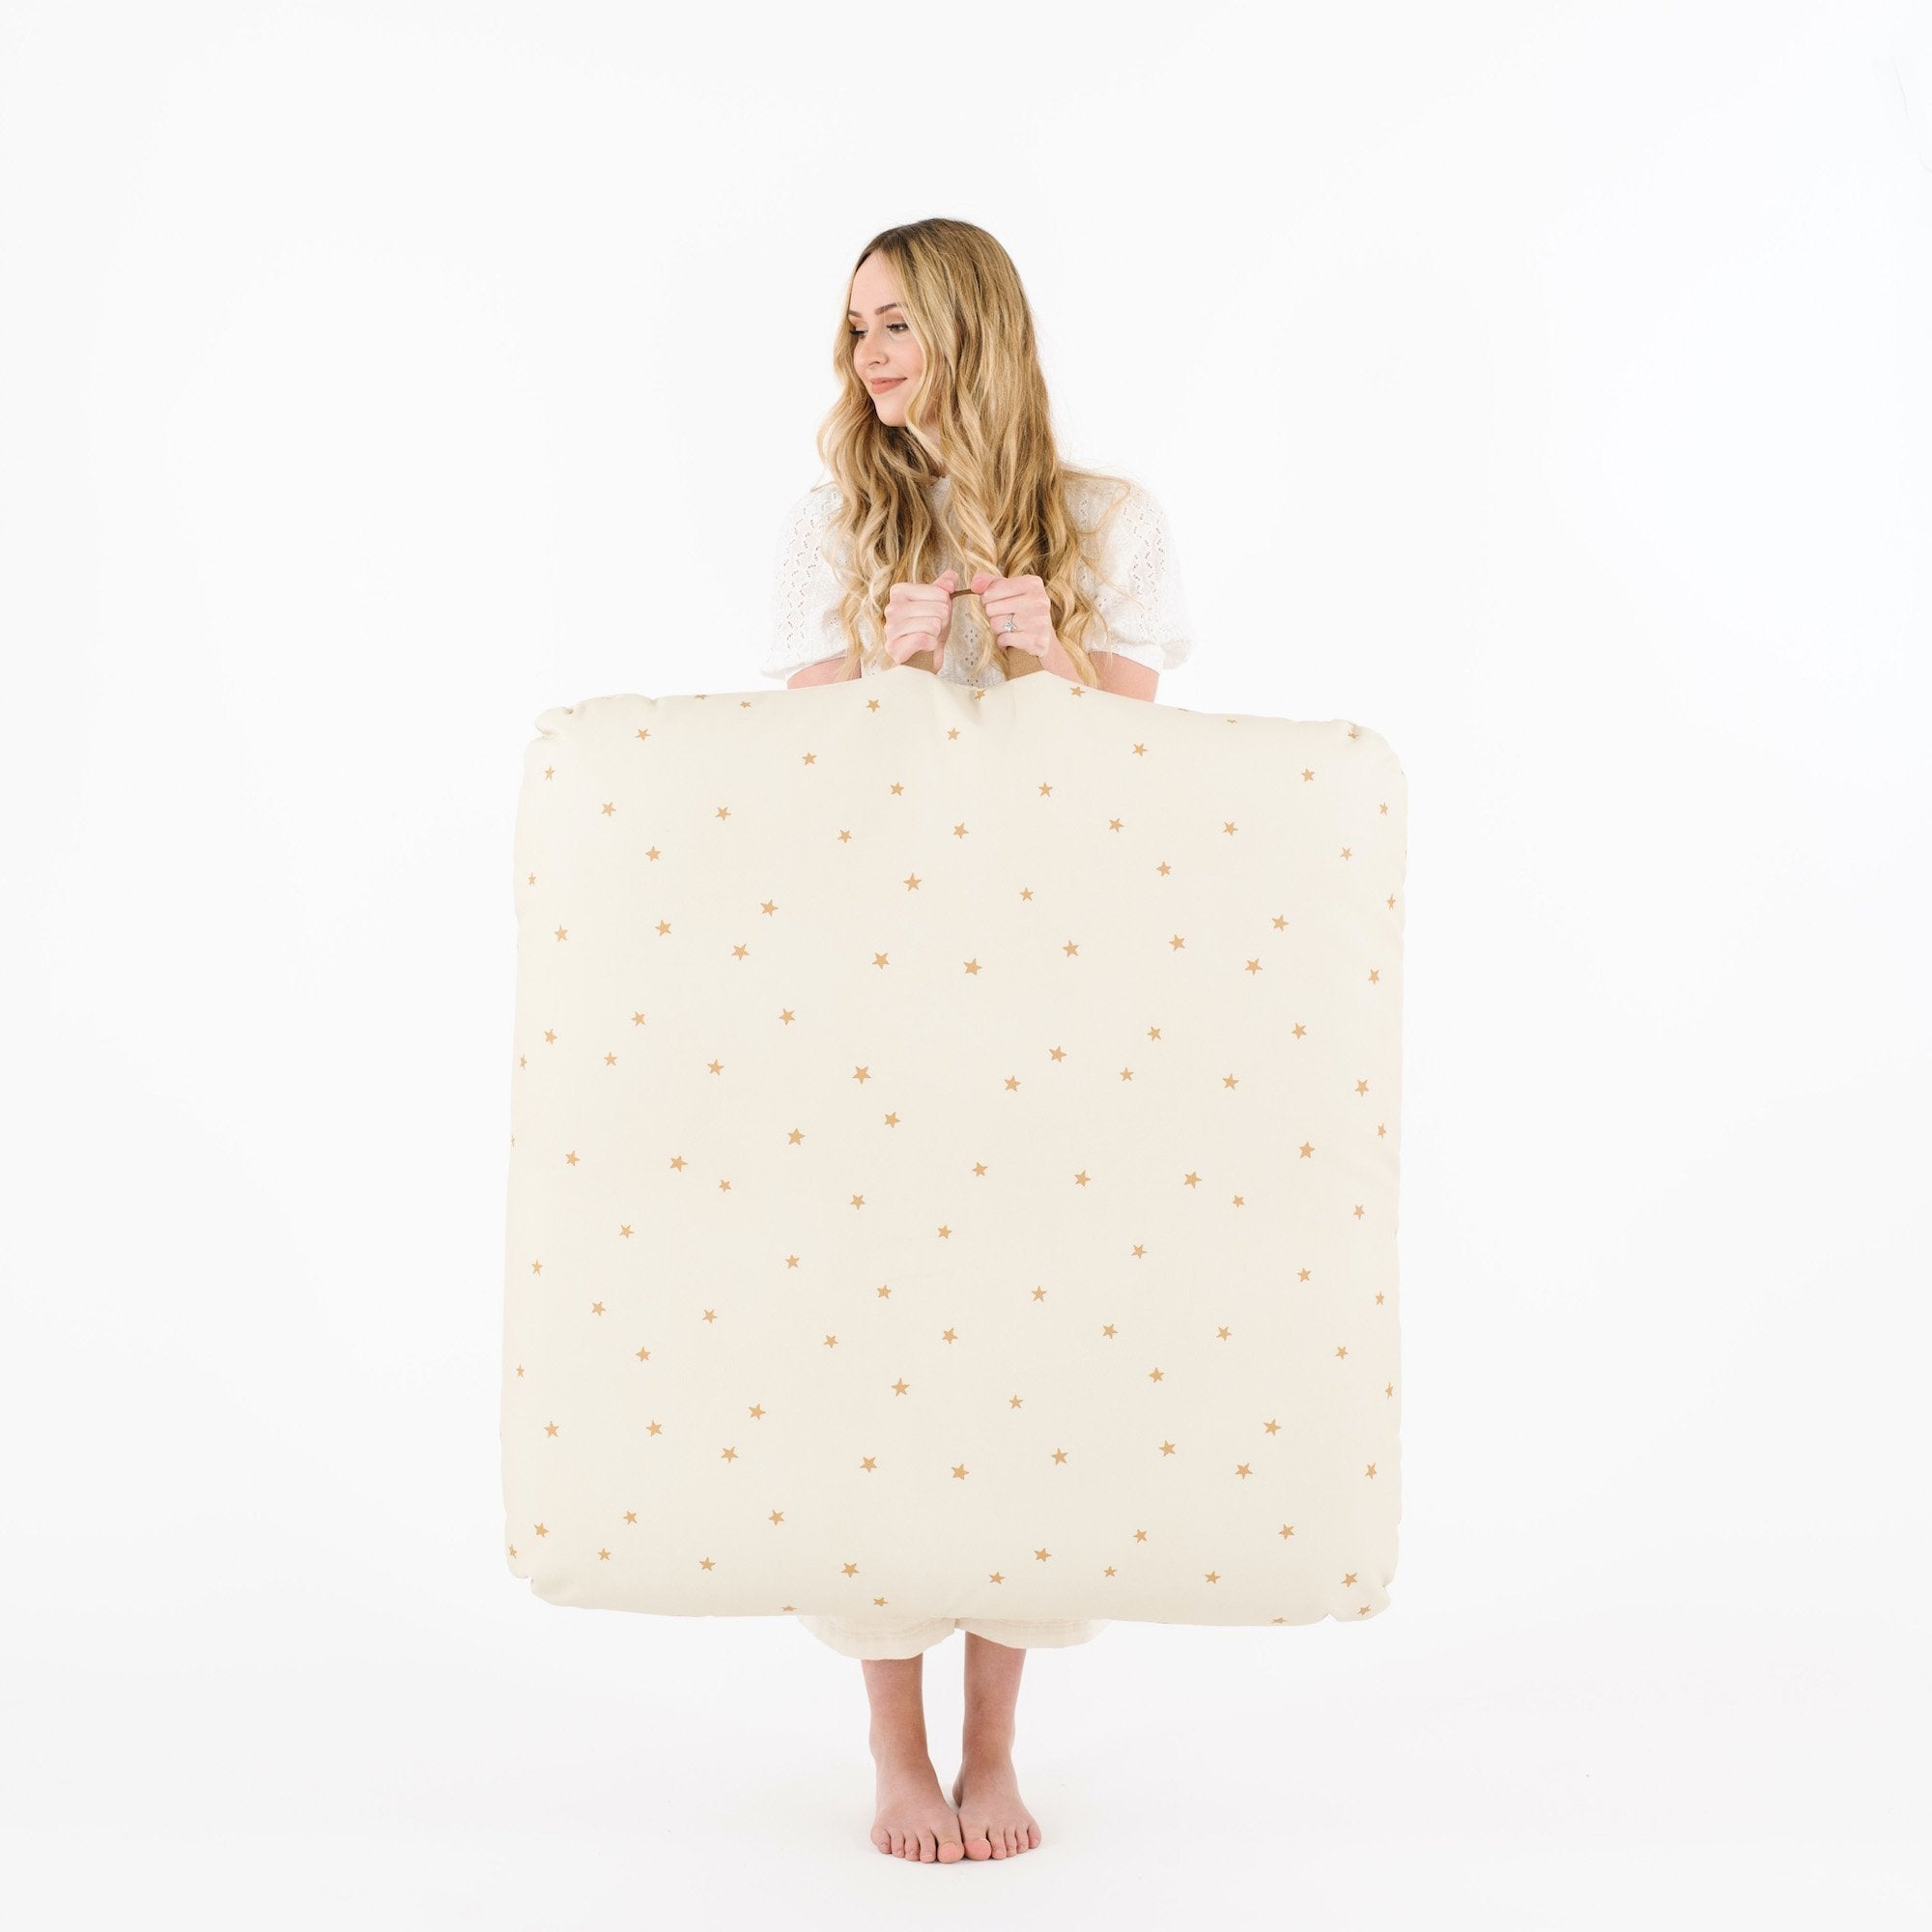 Stars (on sale) / Square@Woman holding the Stars Square Floor Cushion